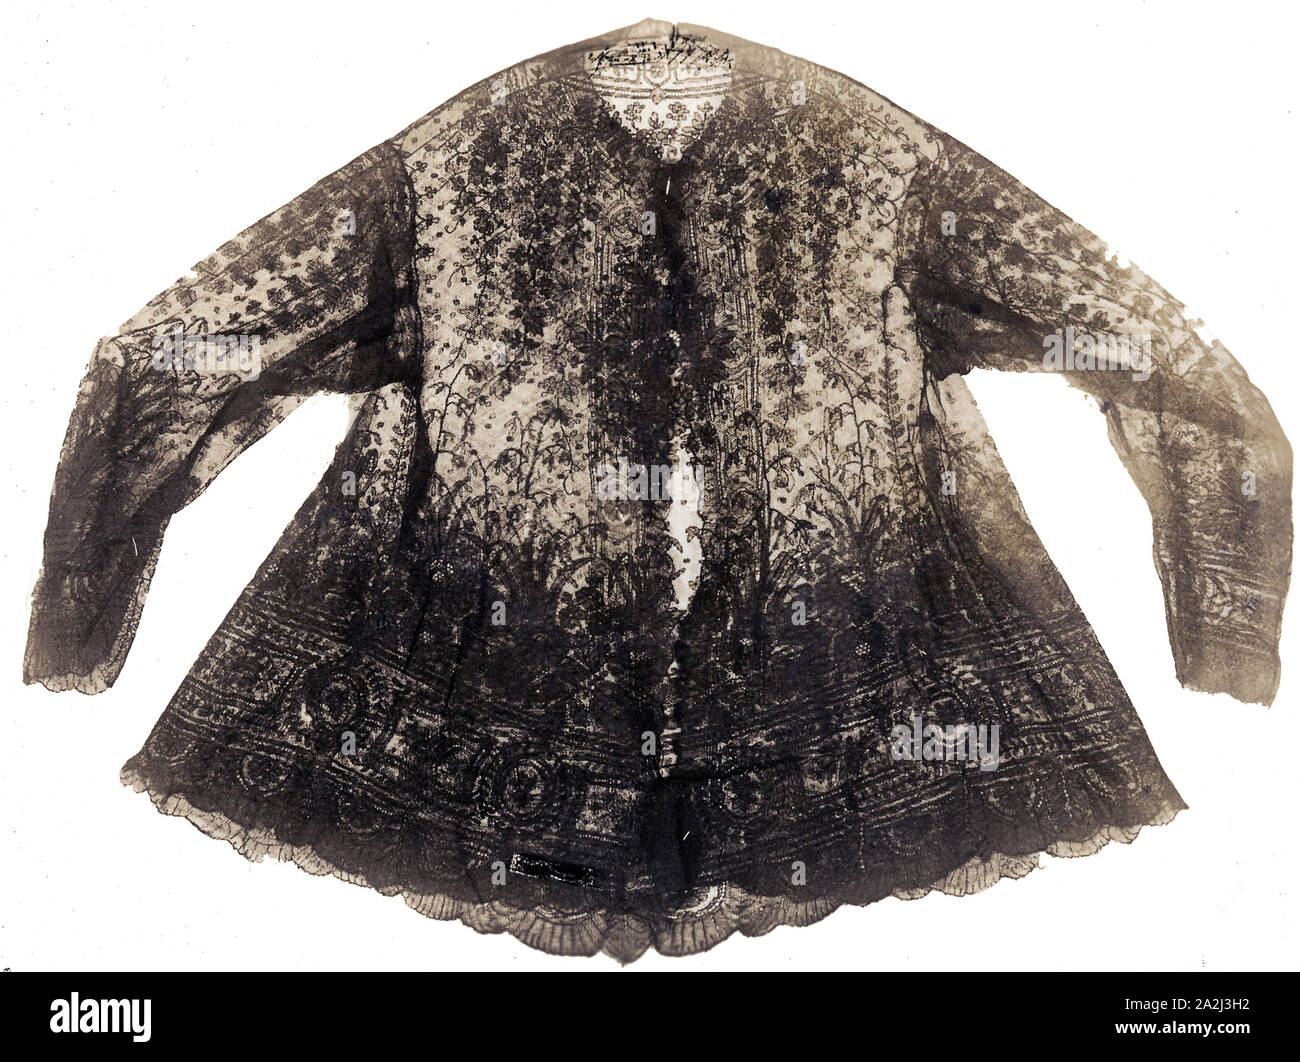 Jacket (Separated Bodice and Sleeves), 1855/65, England or France, England, Silk and mohair, Pusher machine lace, 74.2 × 88.4 cm (29 1/4 × 34 3/4 in Stock Photo